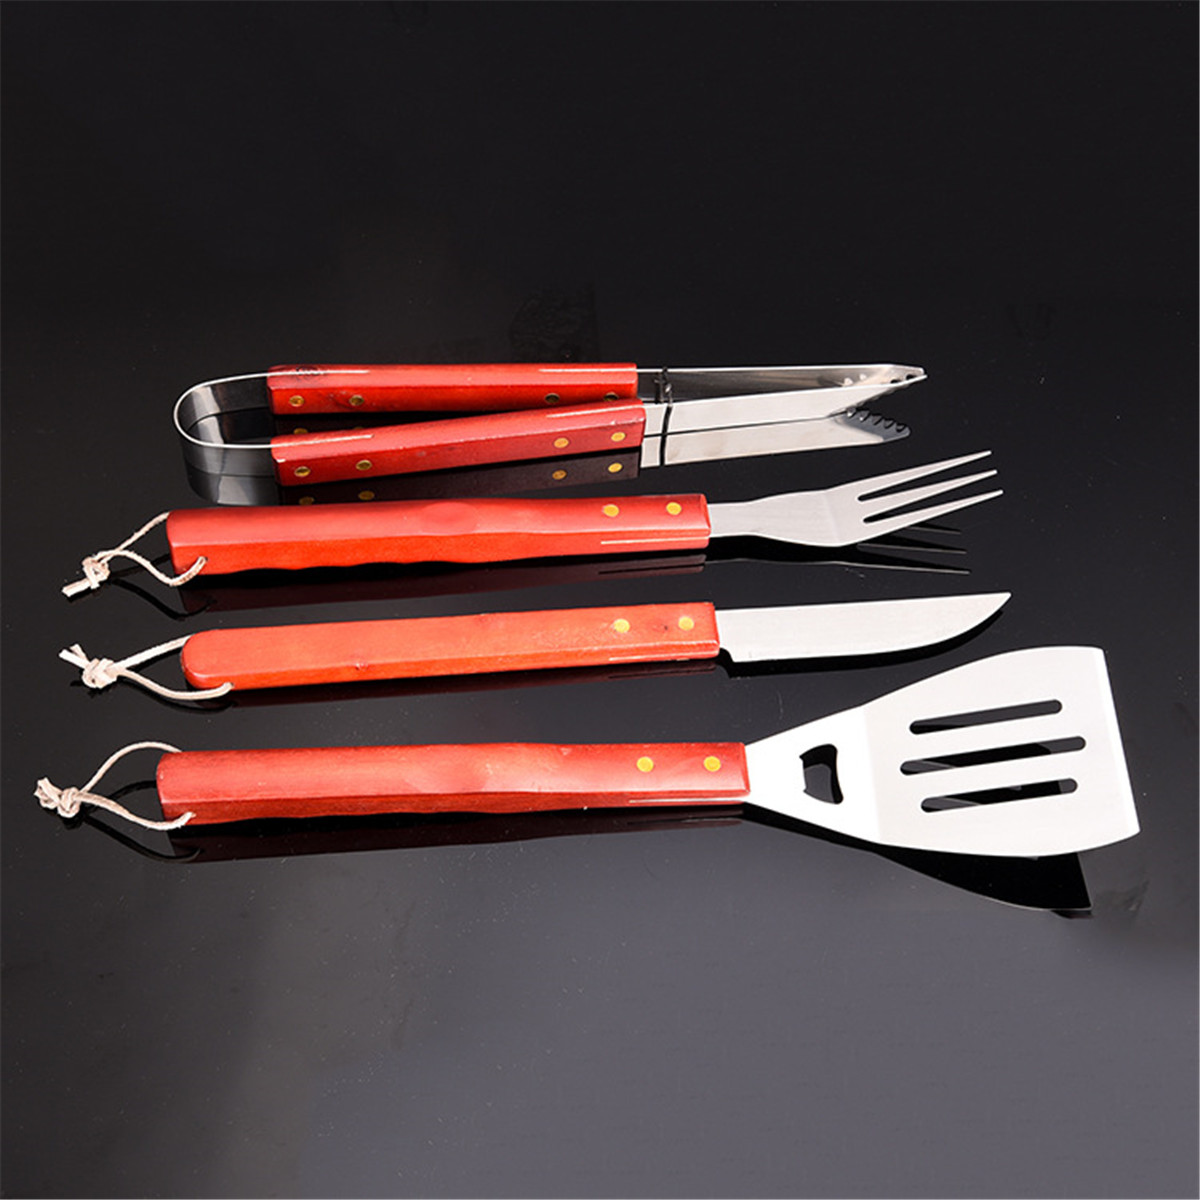 IPReereg-8Pcs-BBQ-Tools-Set-Stainless-Steel-Tableware-Barbecue-Grilling-Accessories-Kit-with-Portabl-1657945-3